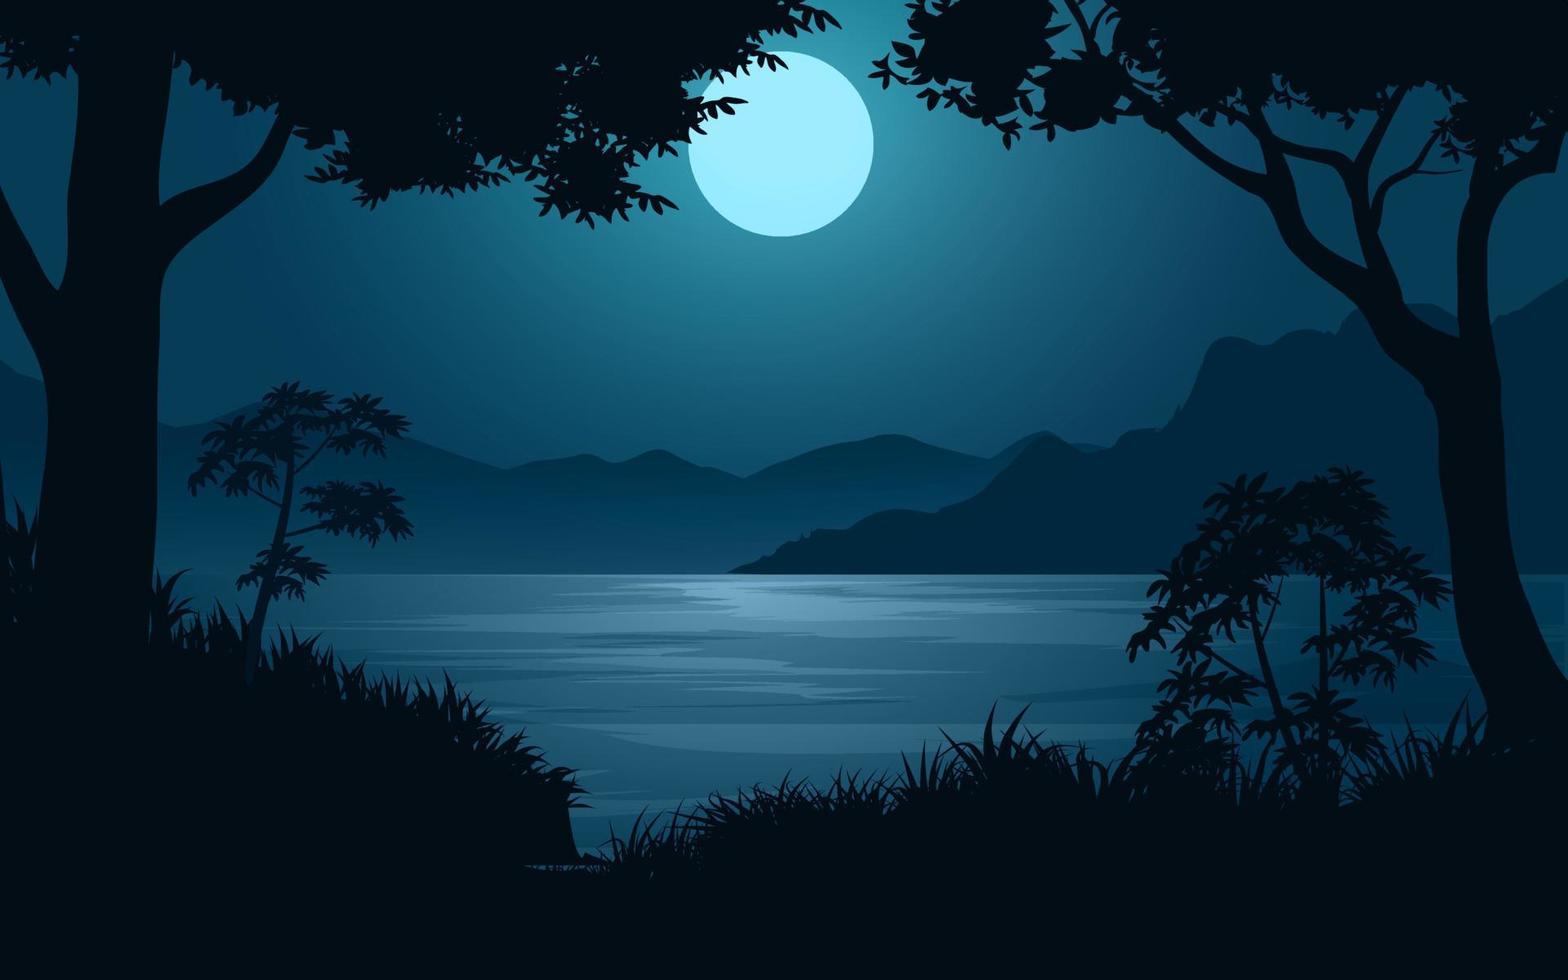 Night time by the lake with moonlight landscape in flat style vector